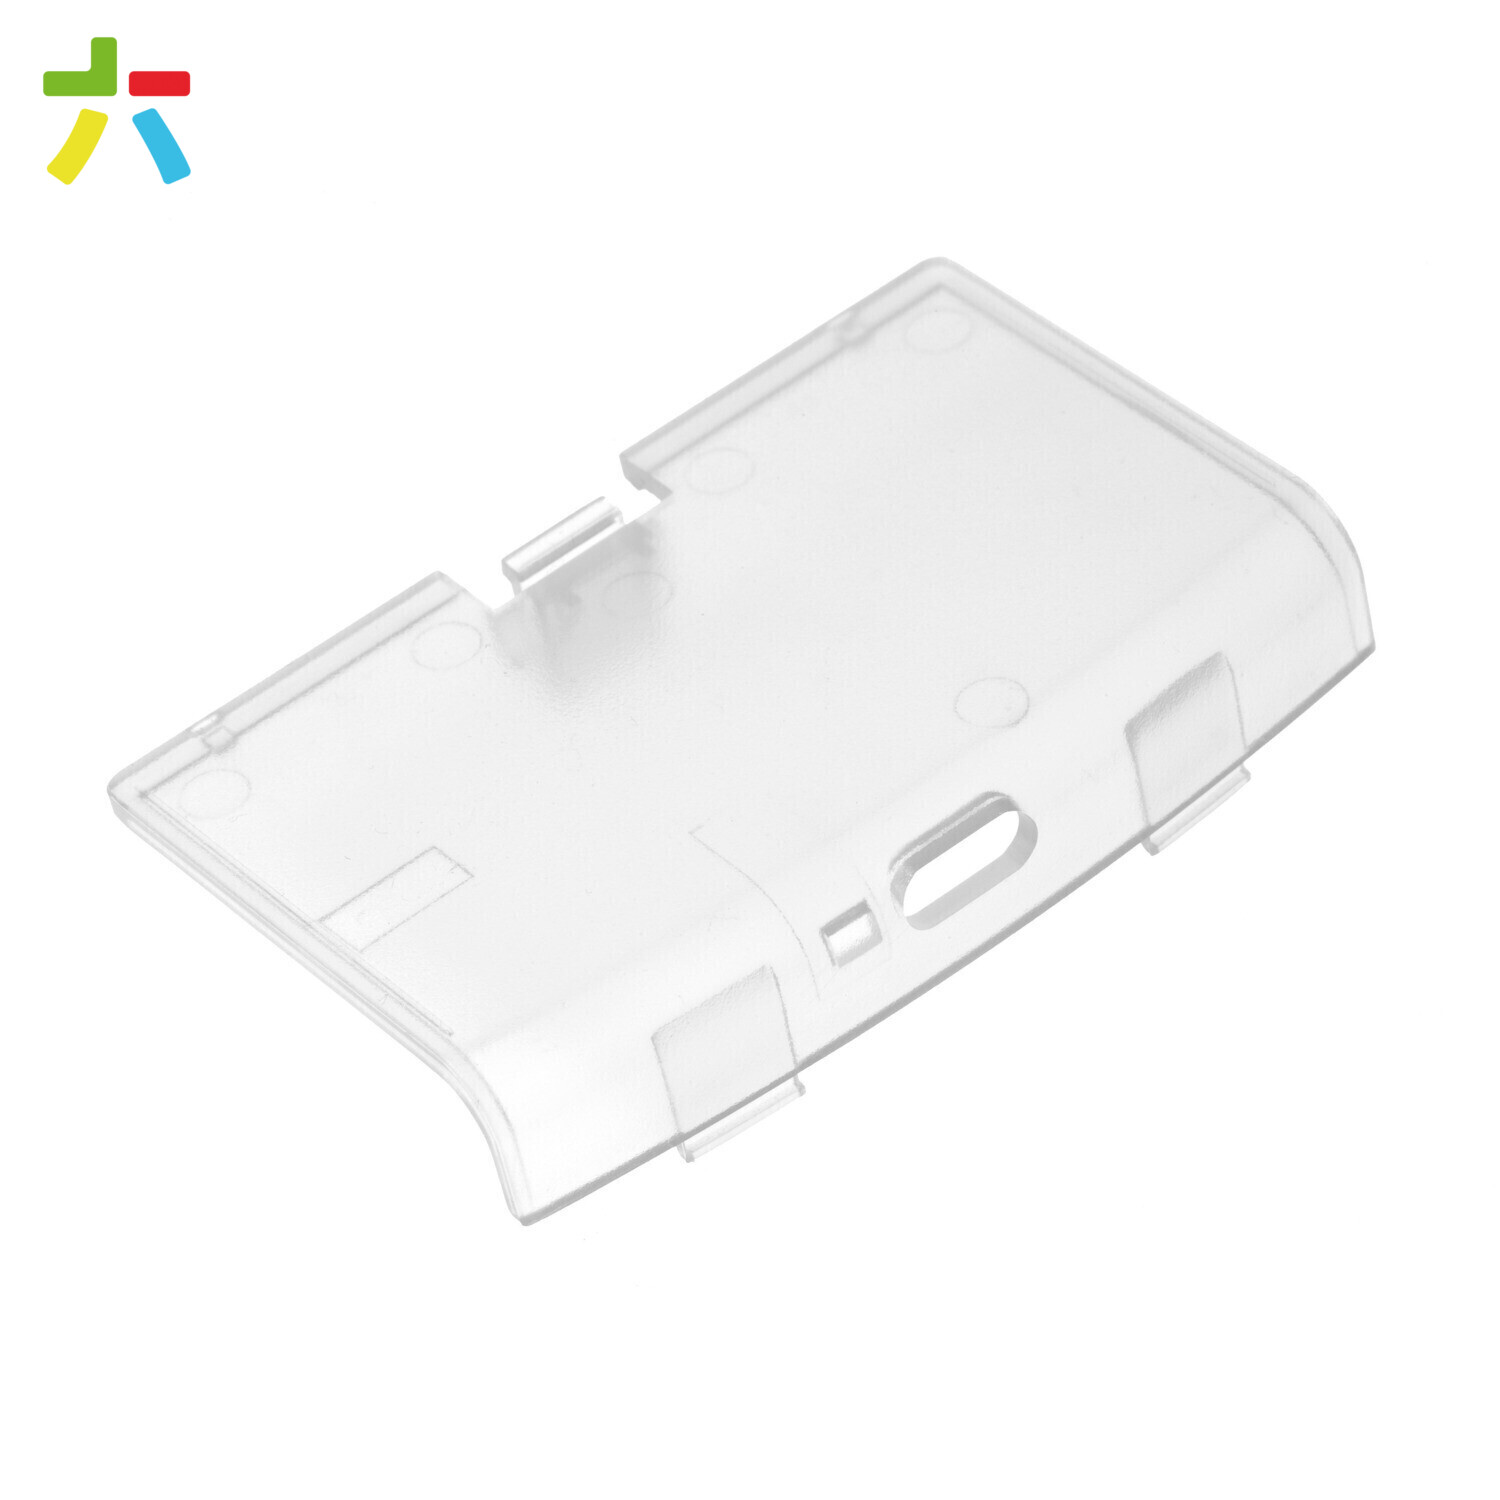 Game Boy Advance USB-C Battery Cover (Clear)